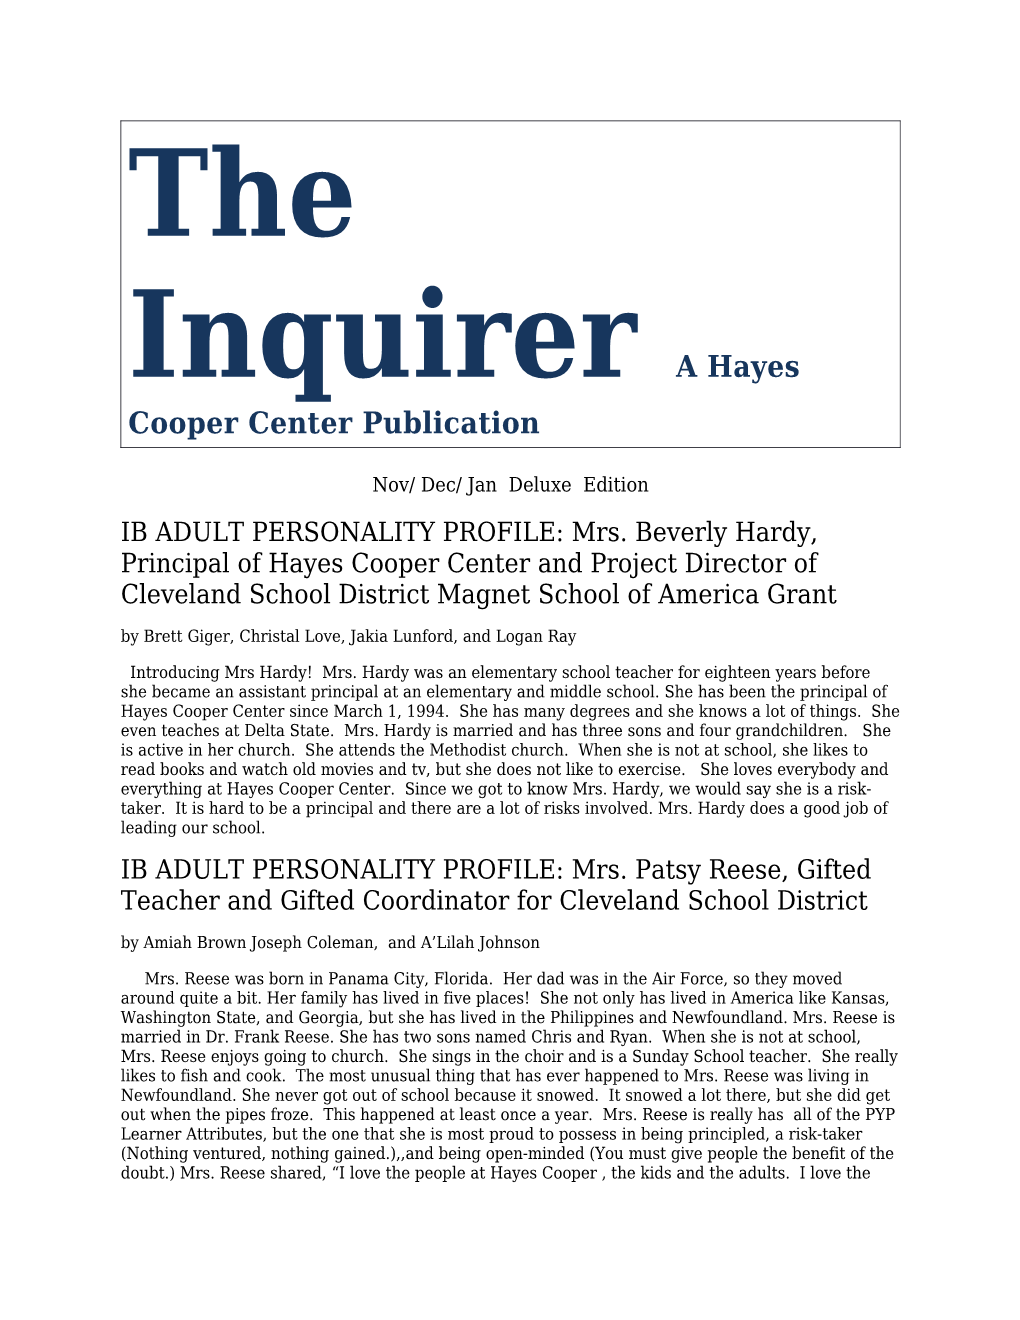 The Inquirera Hayes Coopercenter Publication